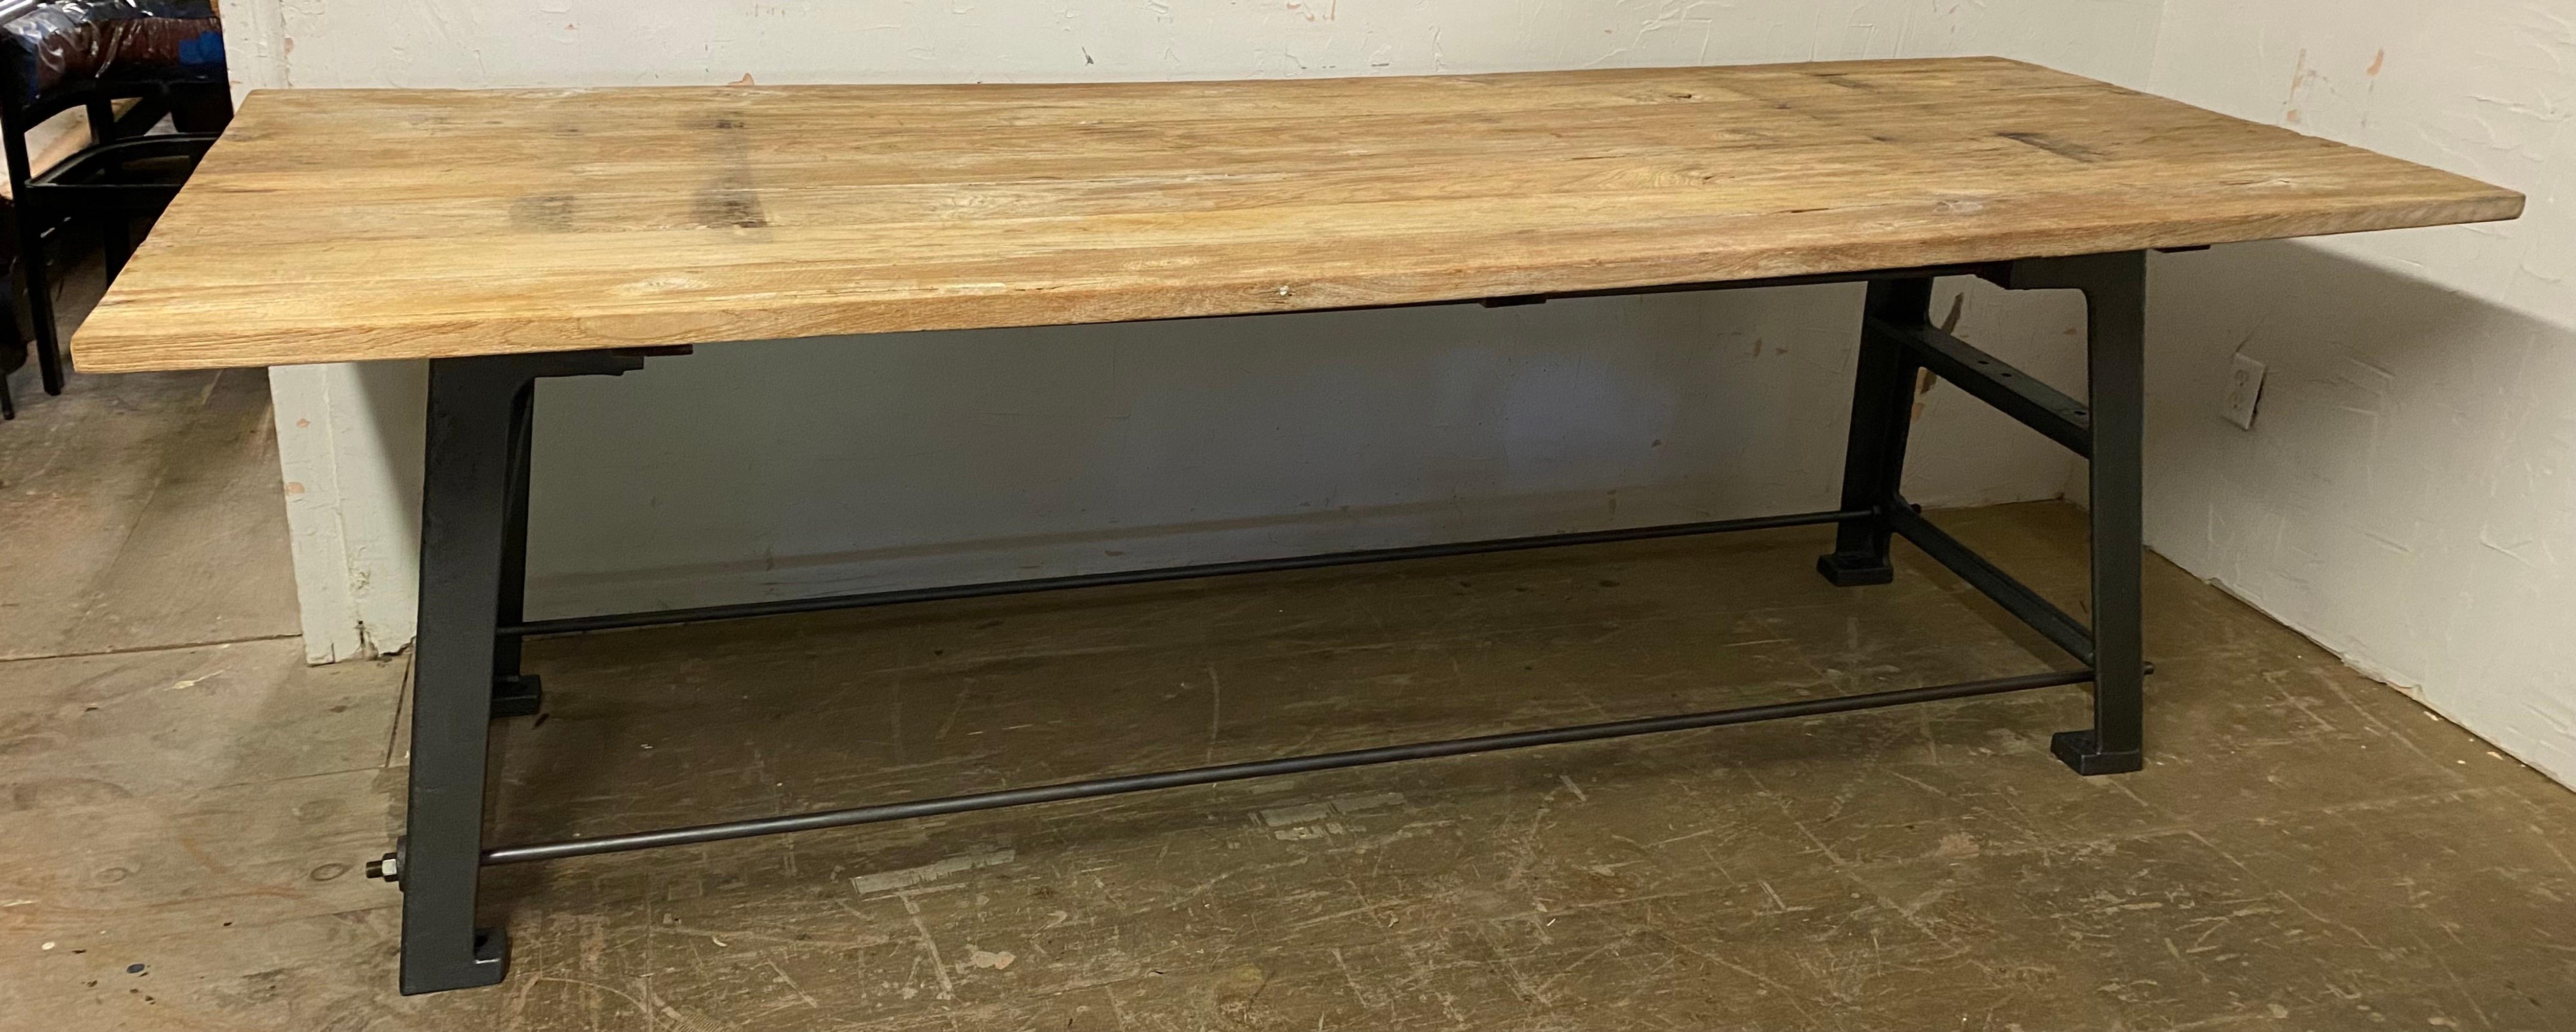 Large Industrial Worktable or Kitchen Island For Sale 2